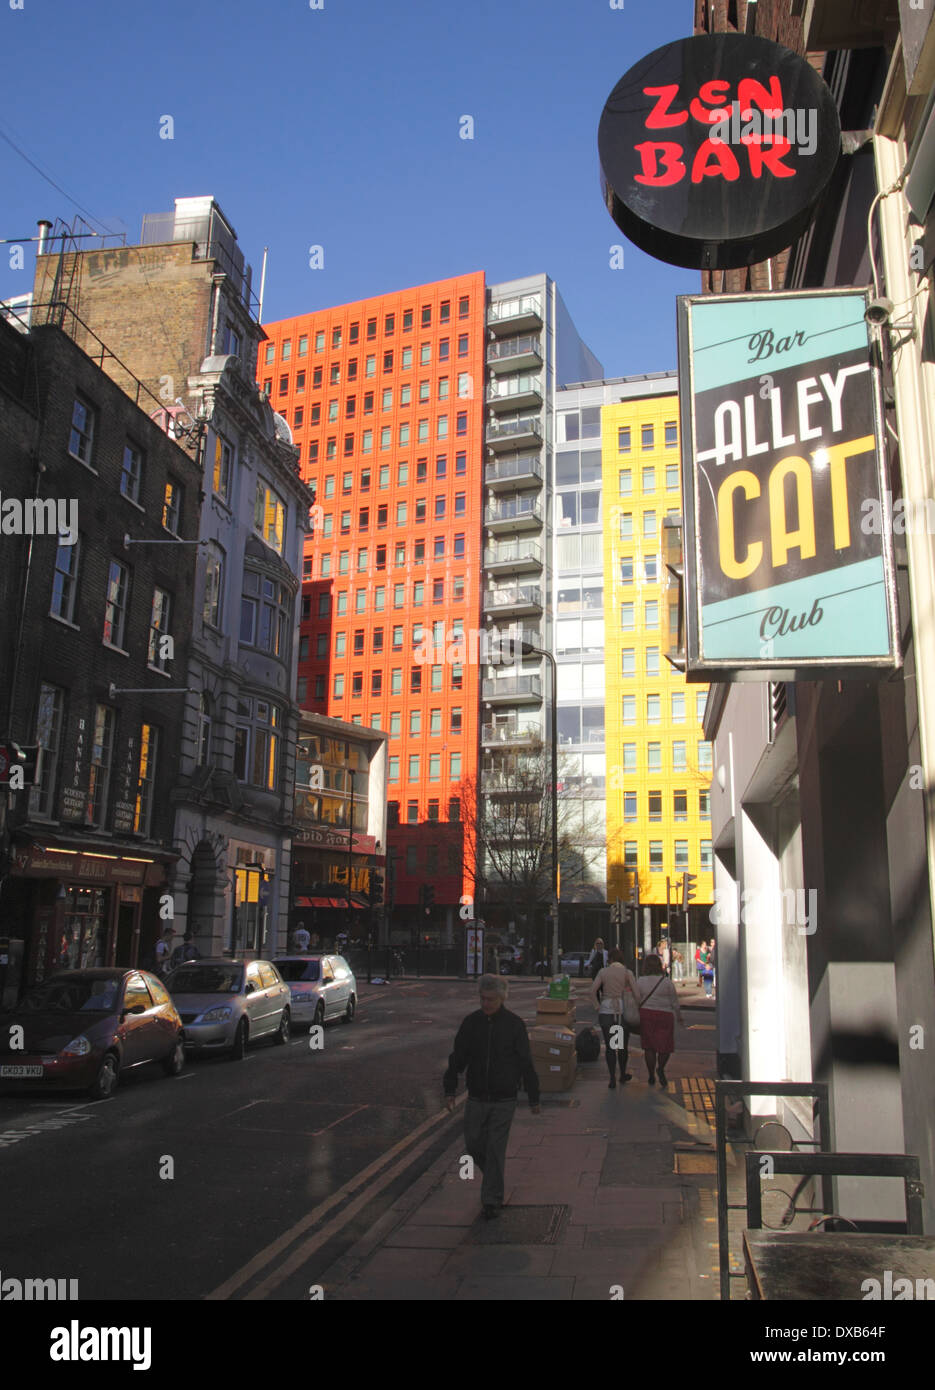 Denmark Street and Alley Cat club central London Stock Photo